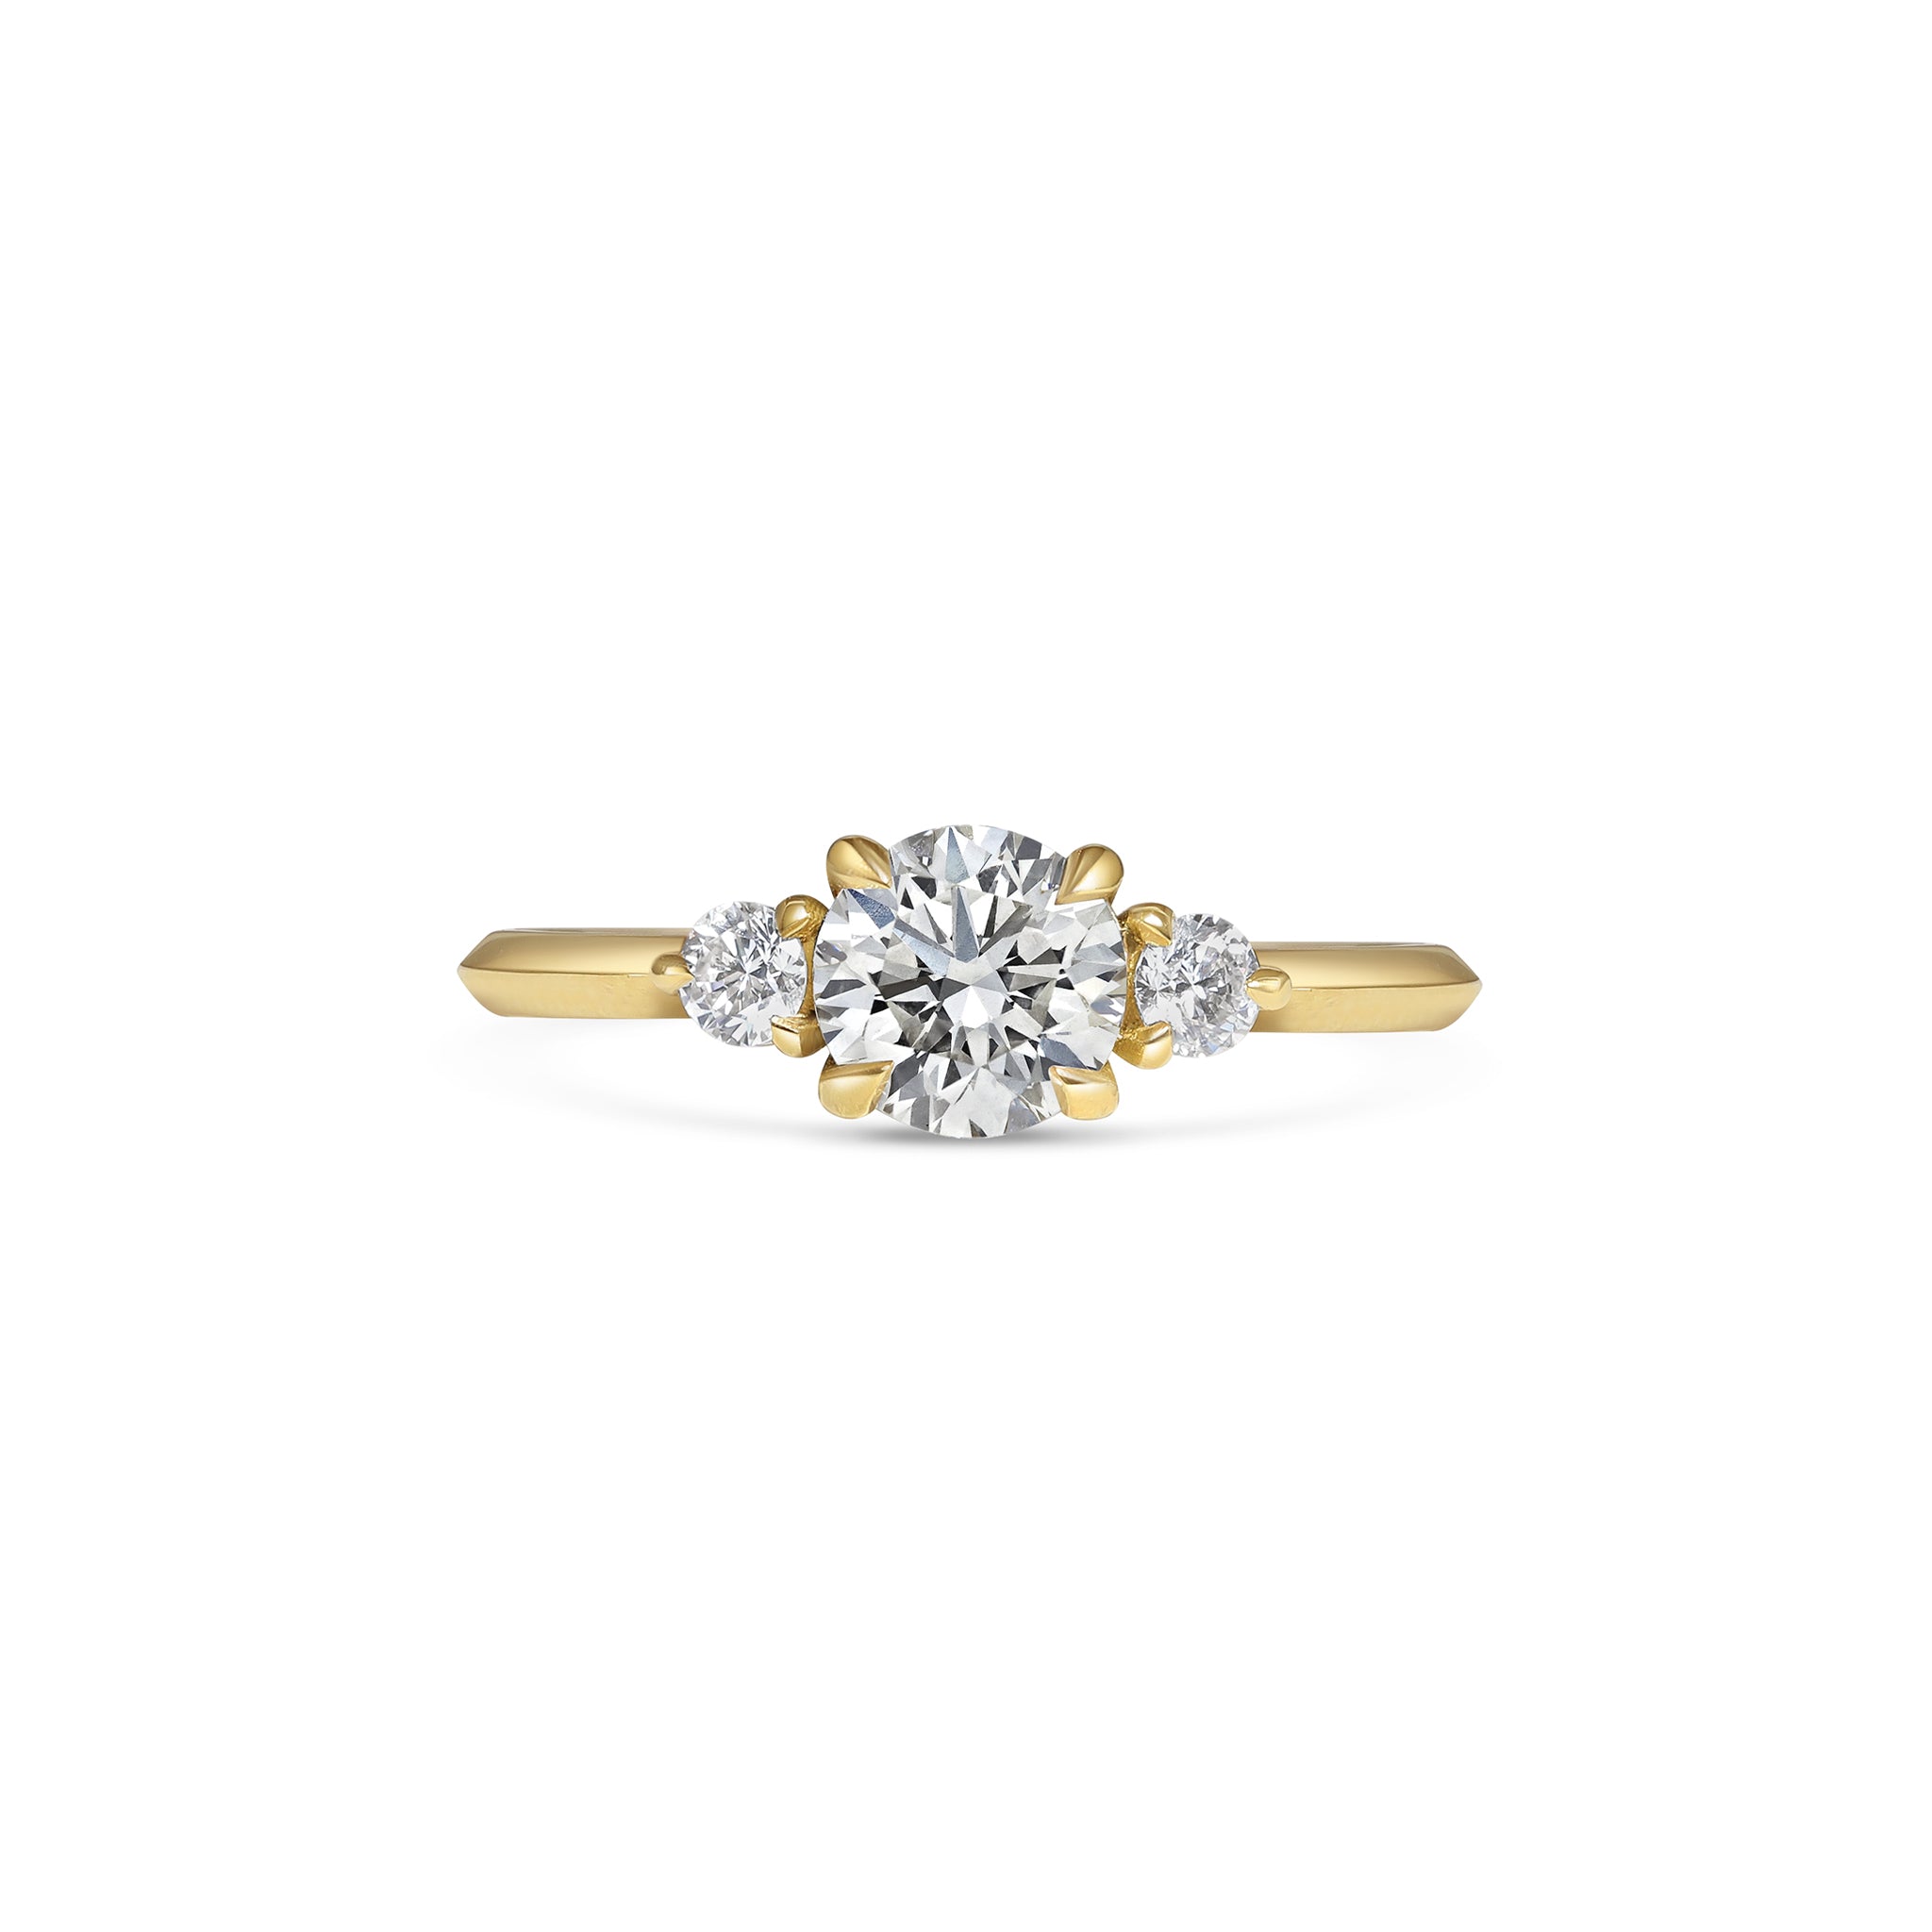 The Rita Ring - Round Cut 0.70ct - In Stock by East London jeweller Rachel Boston | Discover our collections of unique and timeless engagement rings, wedding rings, and modern fine jewellery.